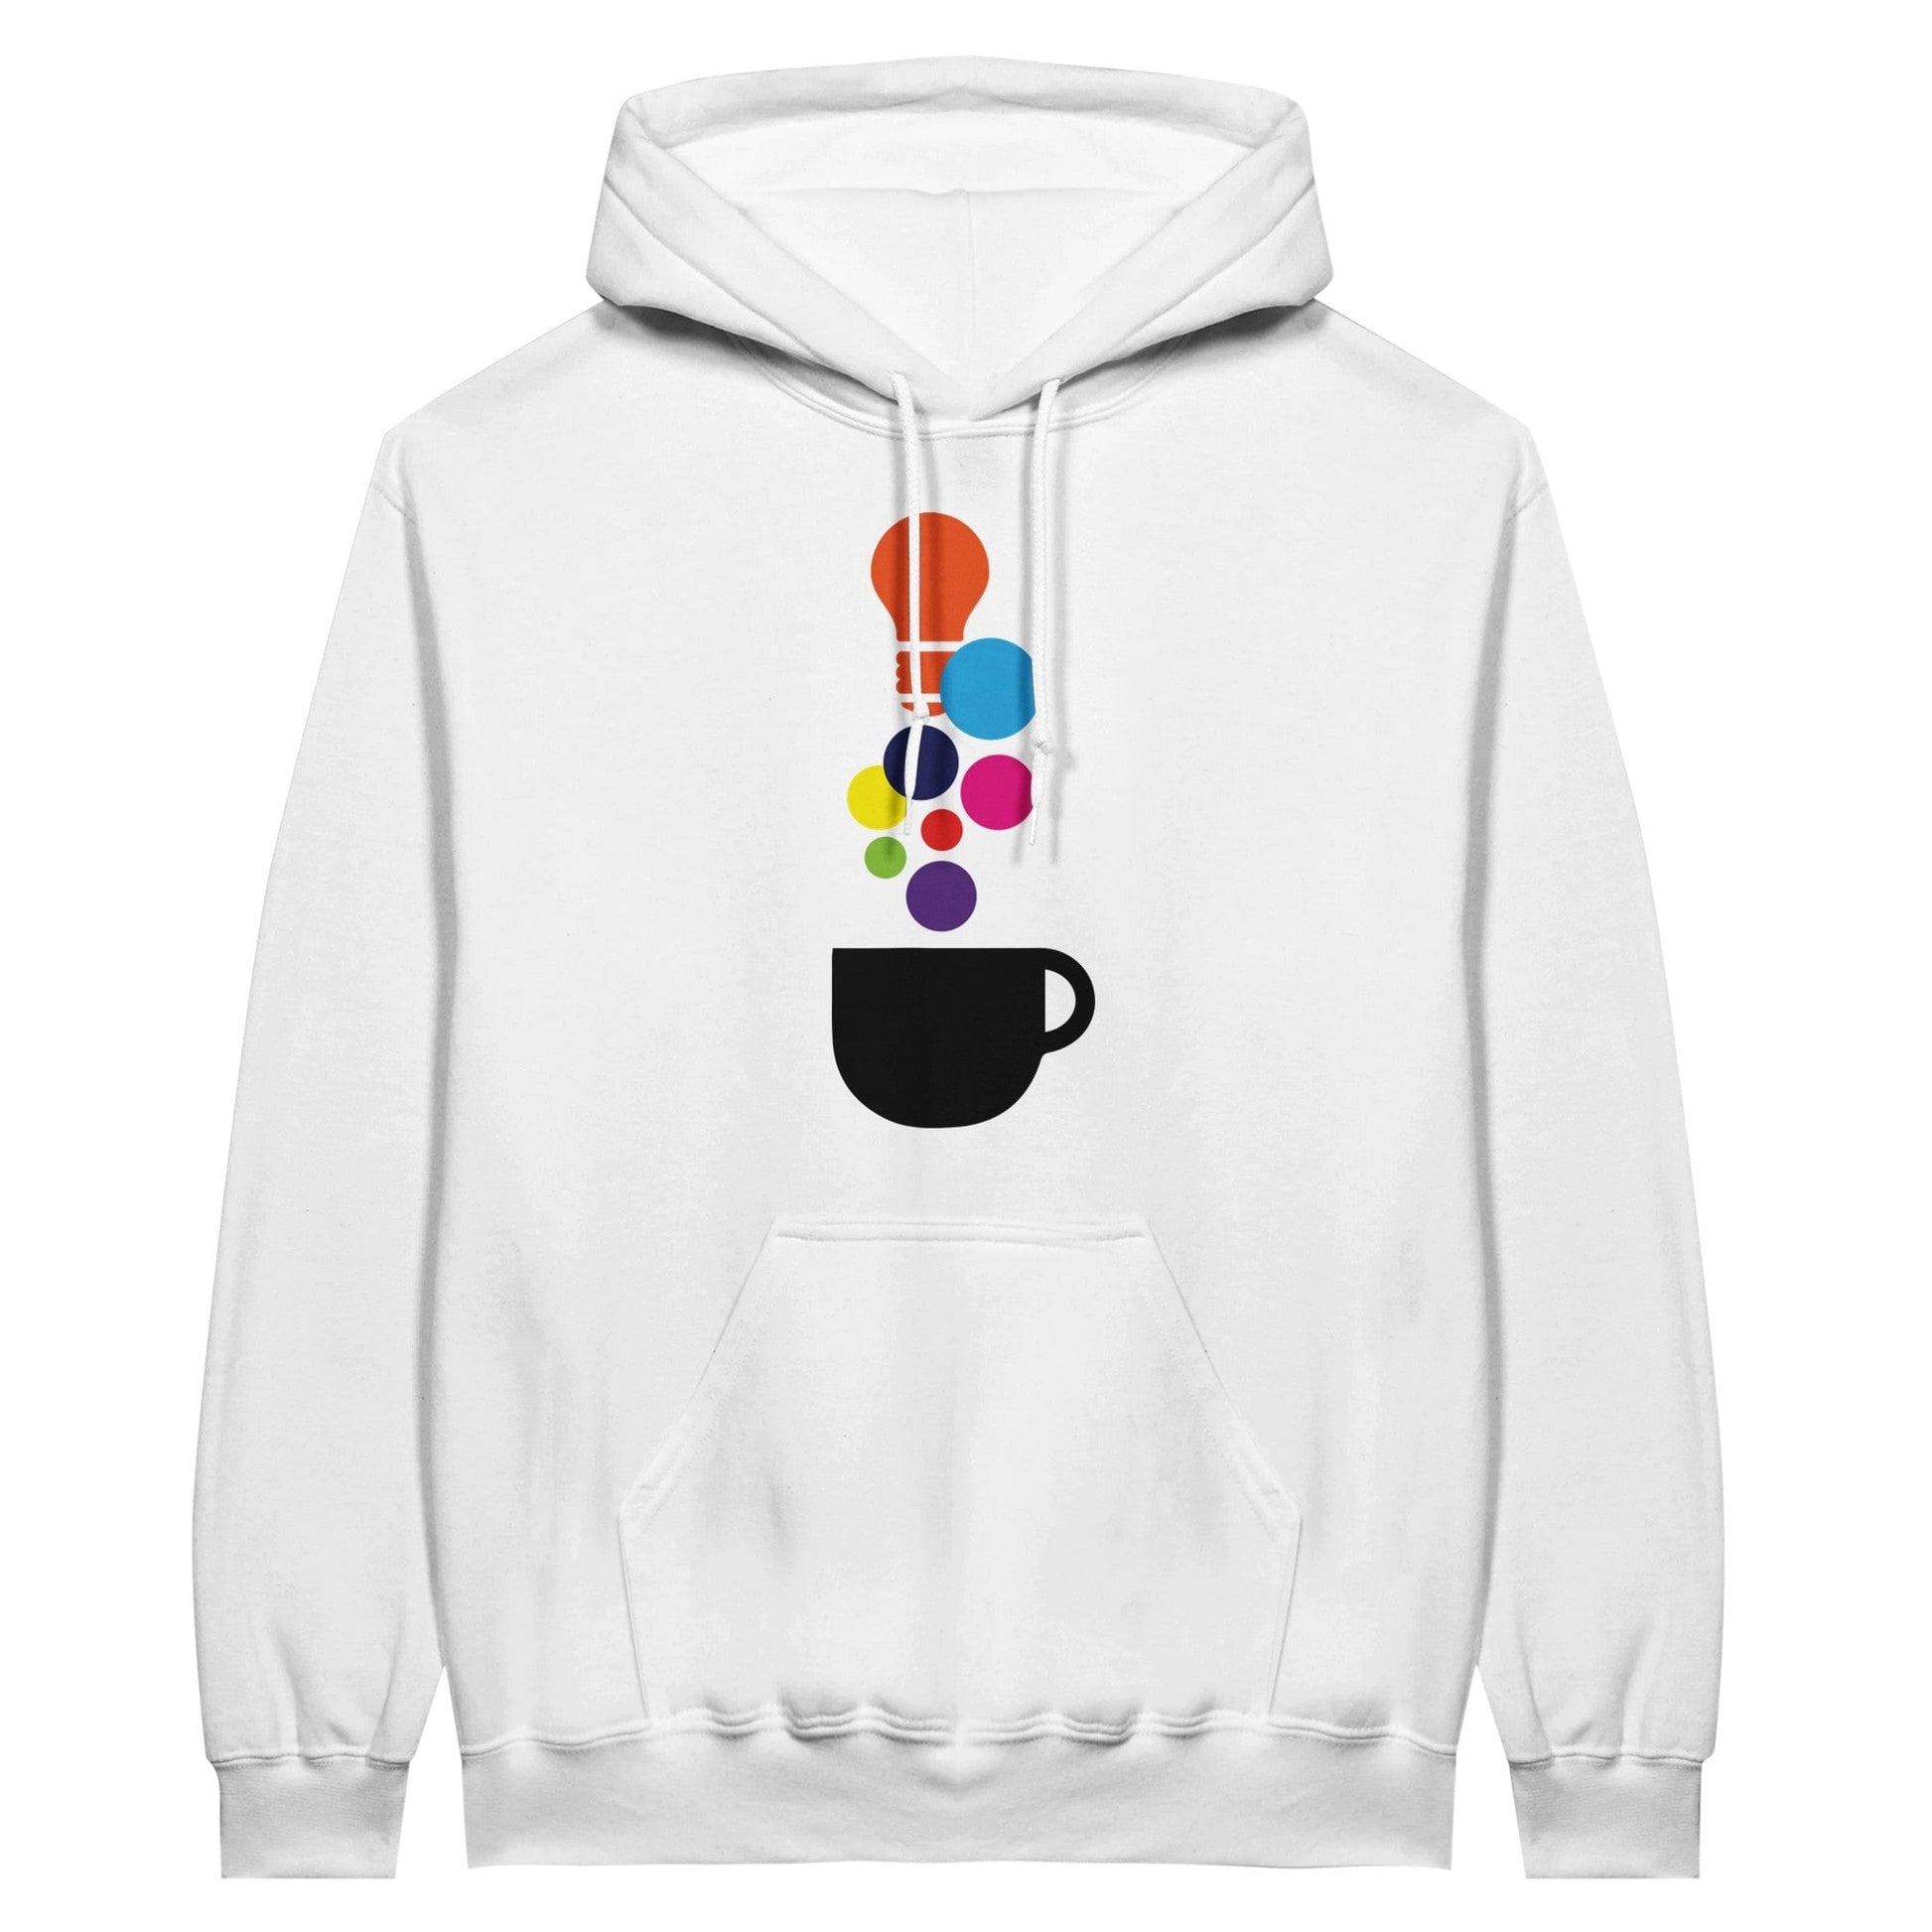 Good Bean Gifts "Creativity in a Cup" - Classic Unisex Pullover Hoodie White / S